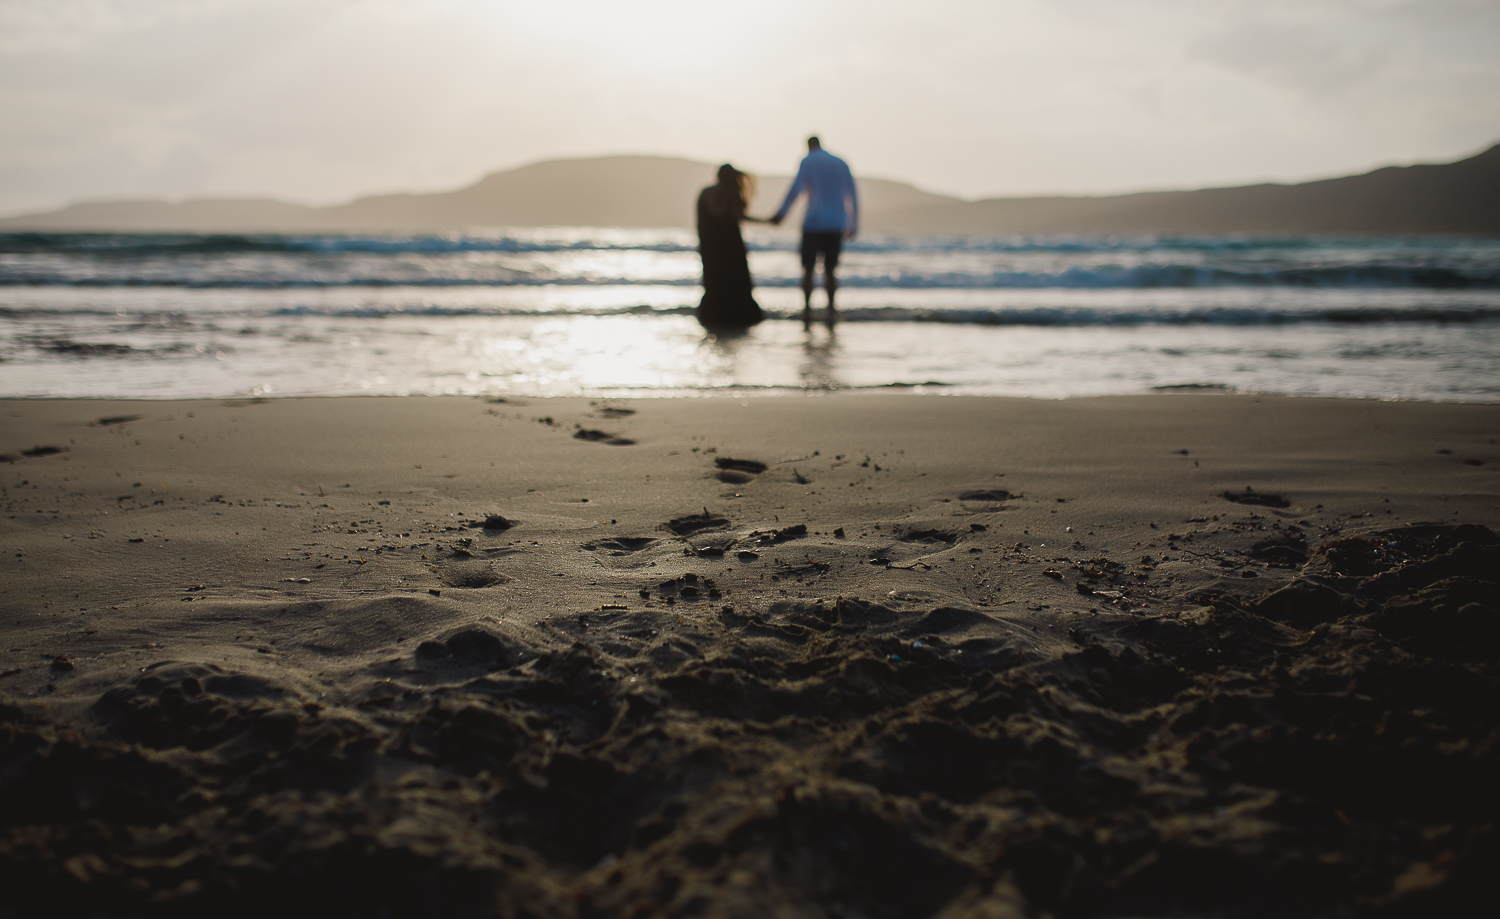 Engagement session on the beach